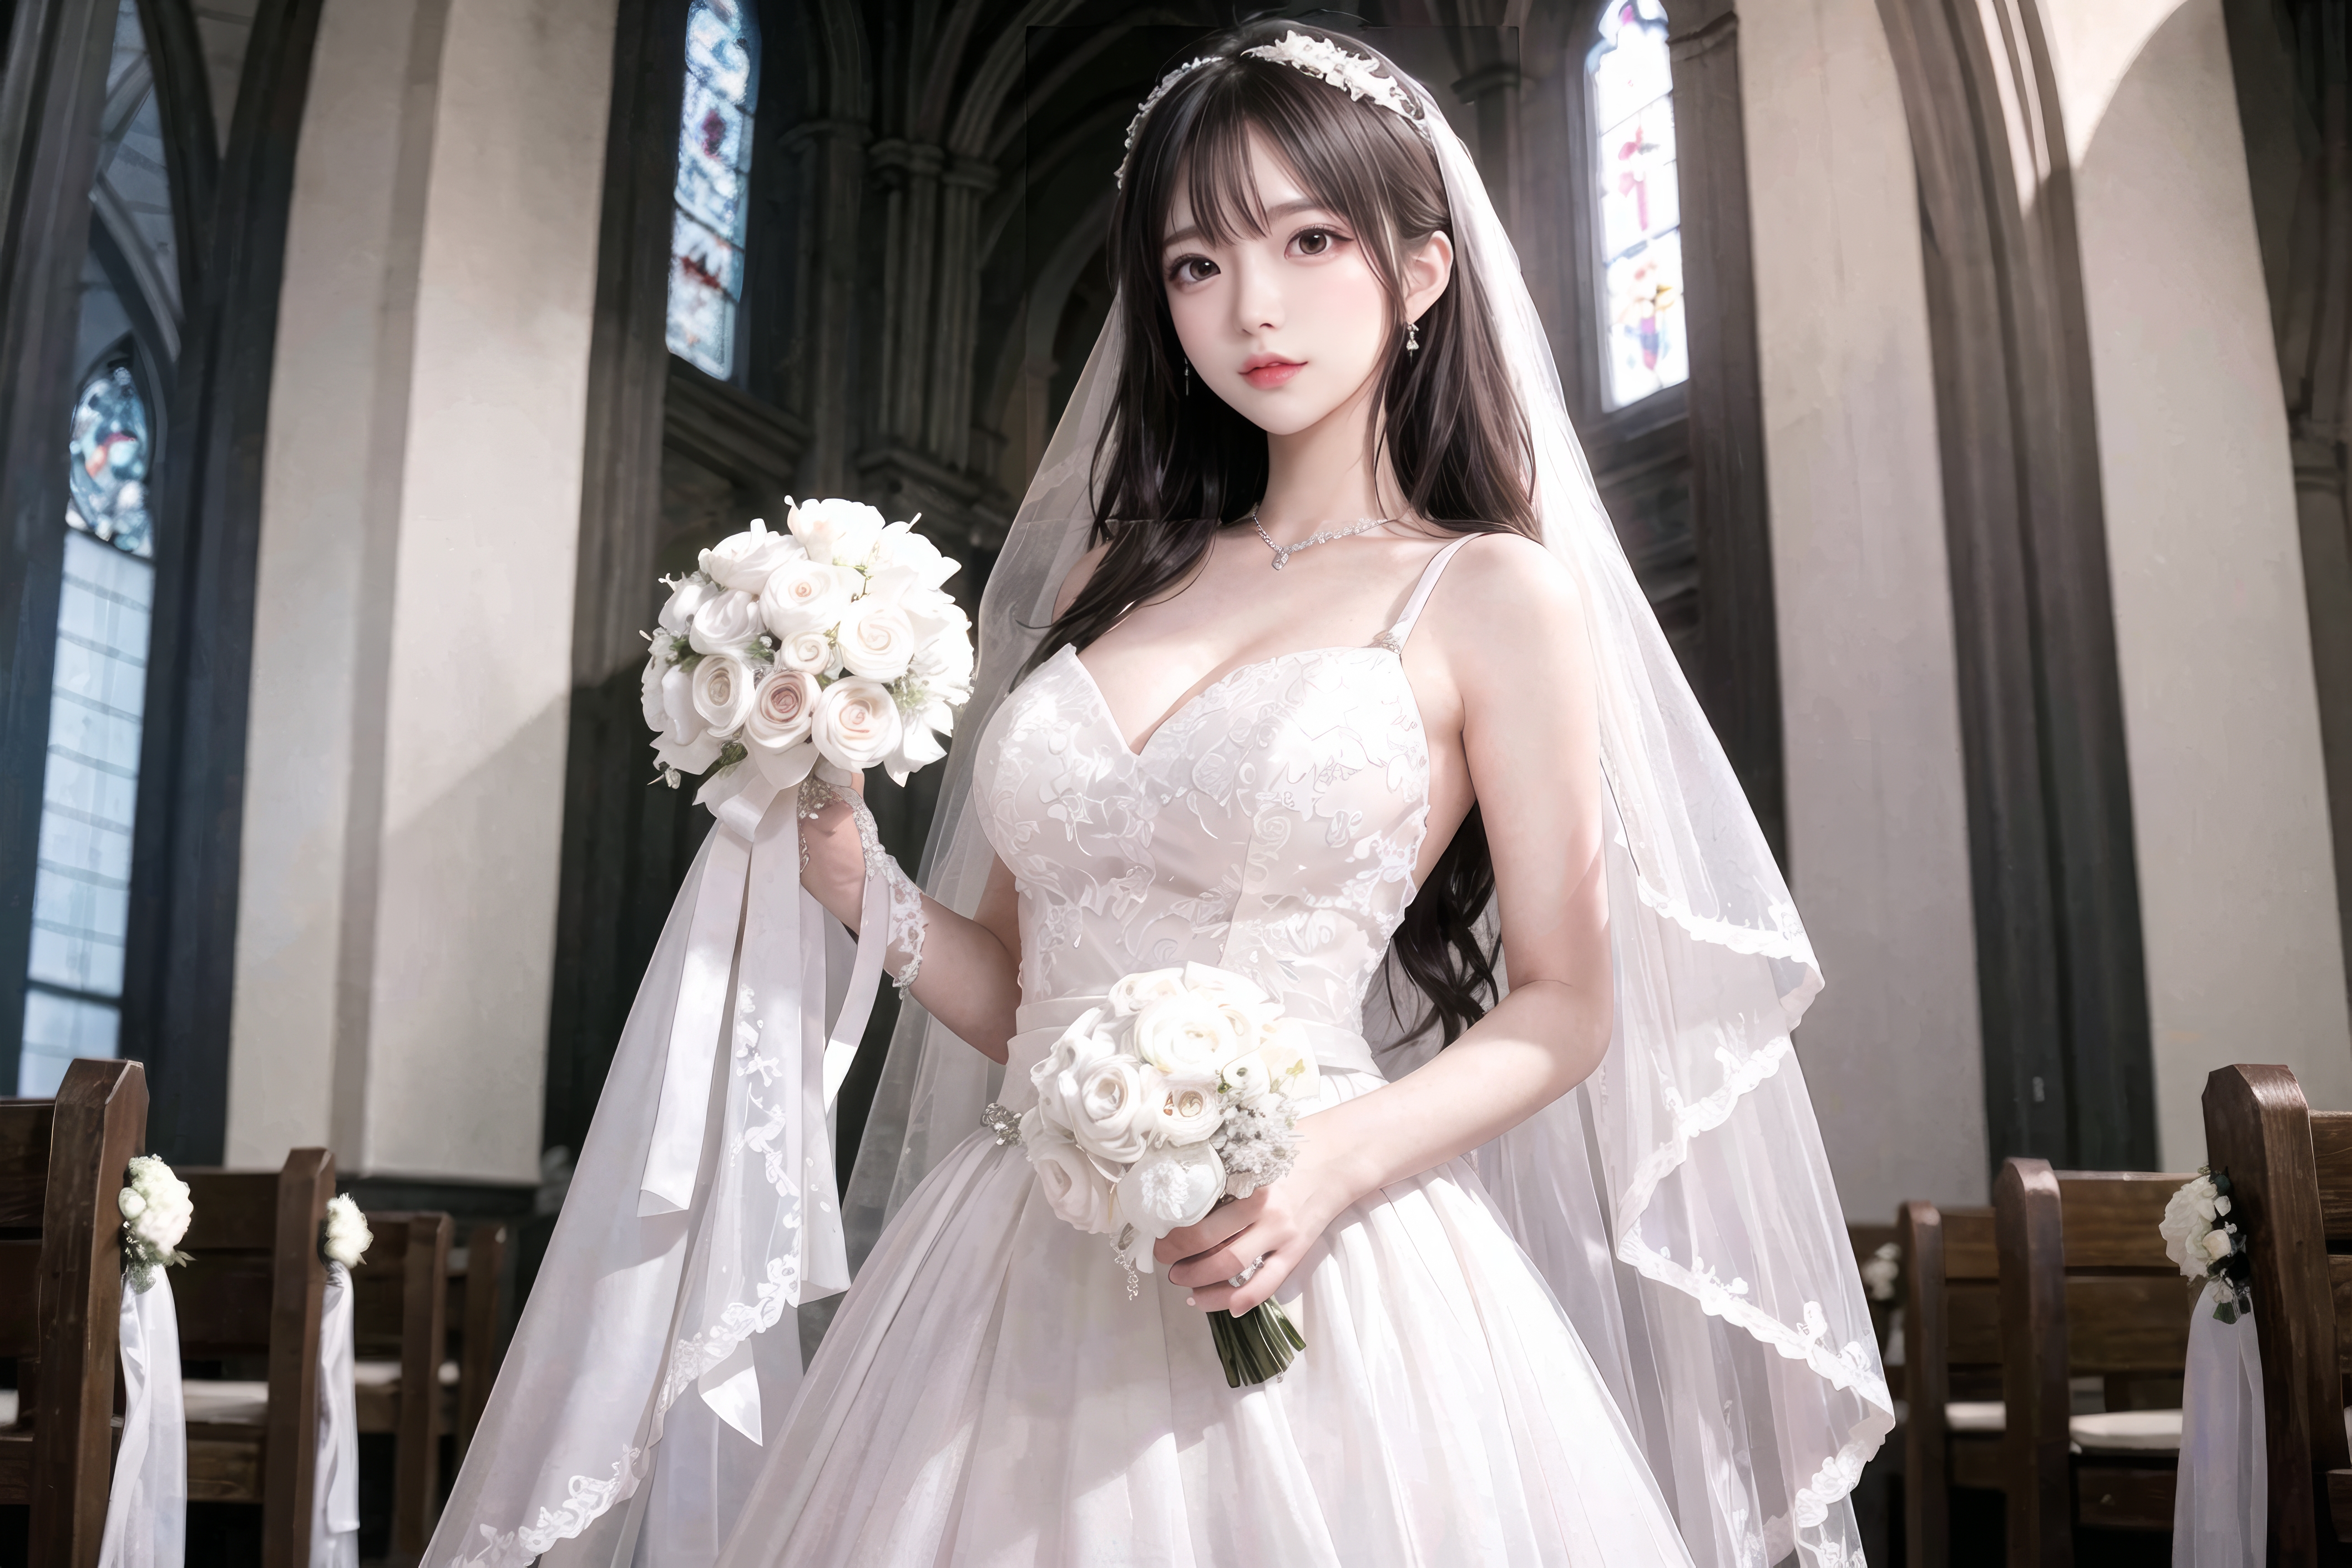 General 4239x2826 wedding dress women AI art standing Asian looking at viewer cleavage stained glass church flowers necklace long hair earring